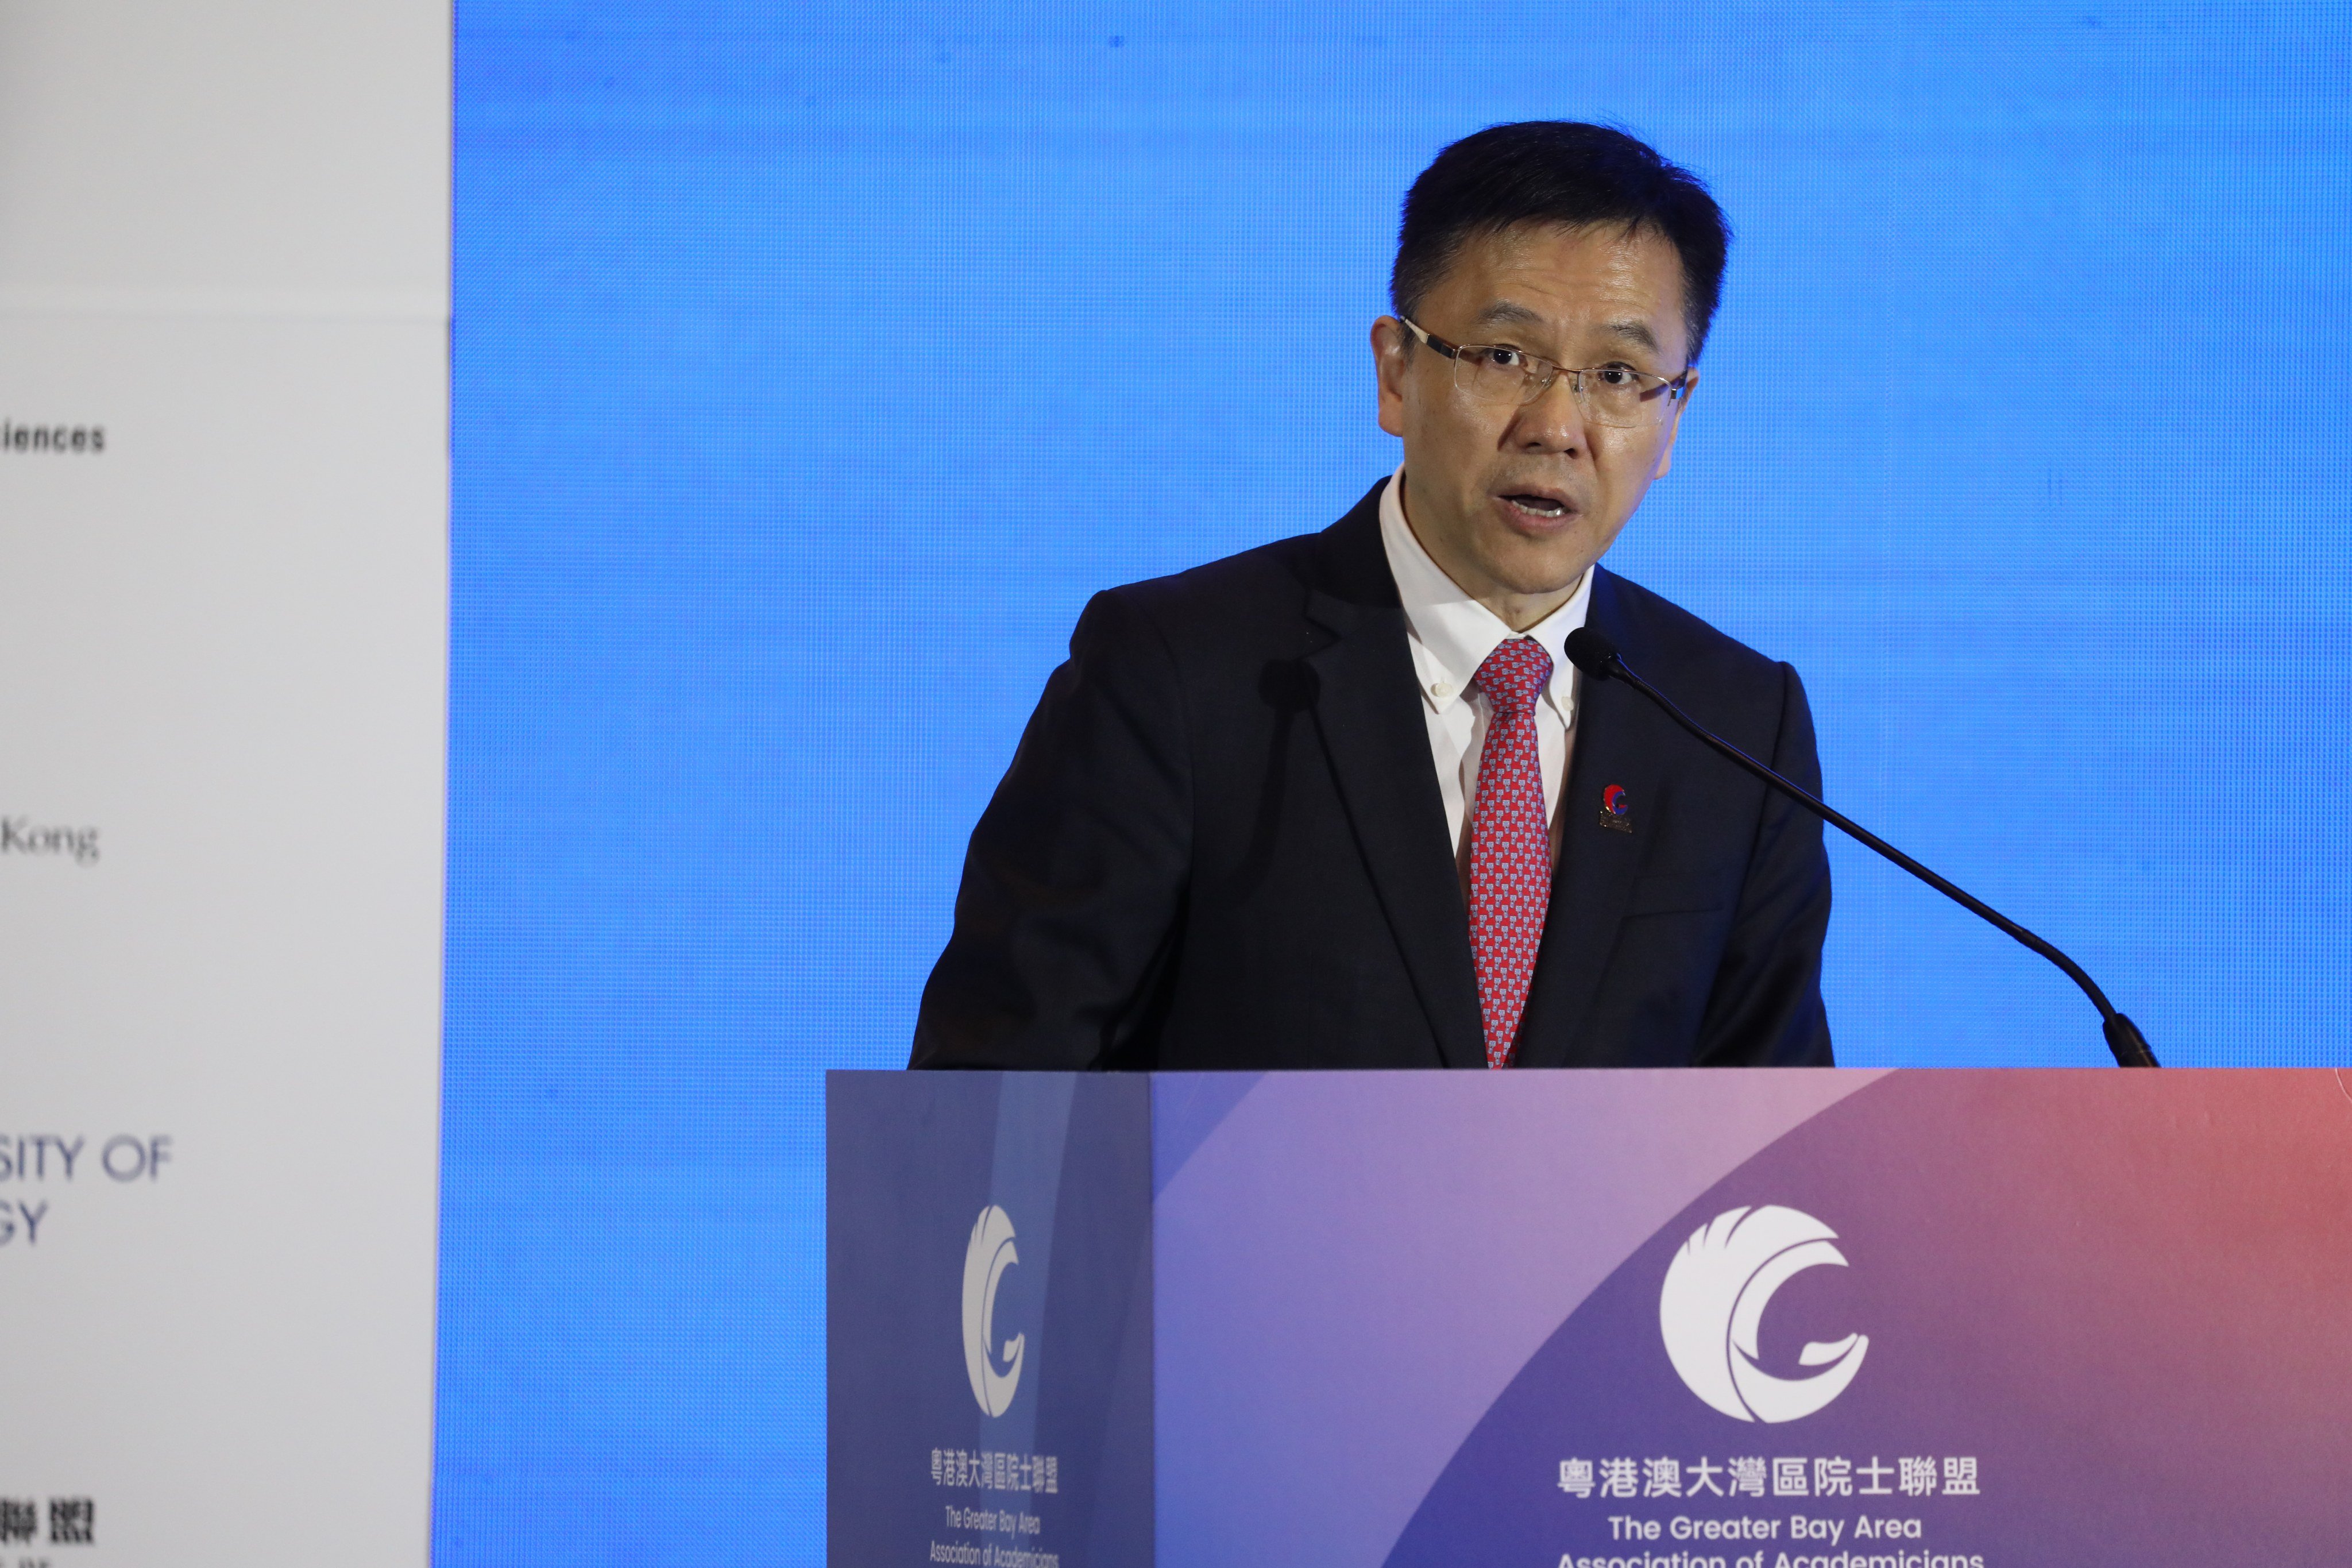 Hong Kong’s Secretary for Innovation, Technology and Industry, Sun Dong, says the government has sharpened its focus on fostering the growth of exceptional innovation and technology talent in the city. Photo: Sun Yeung